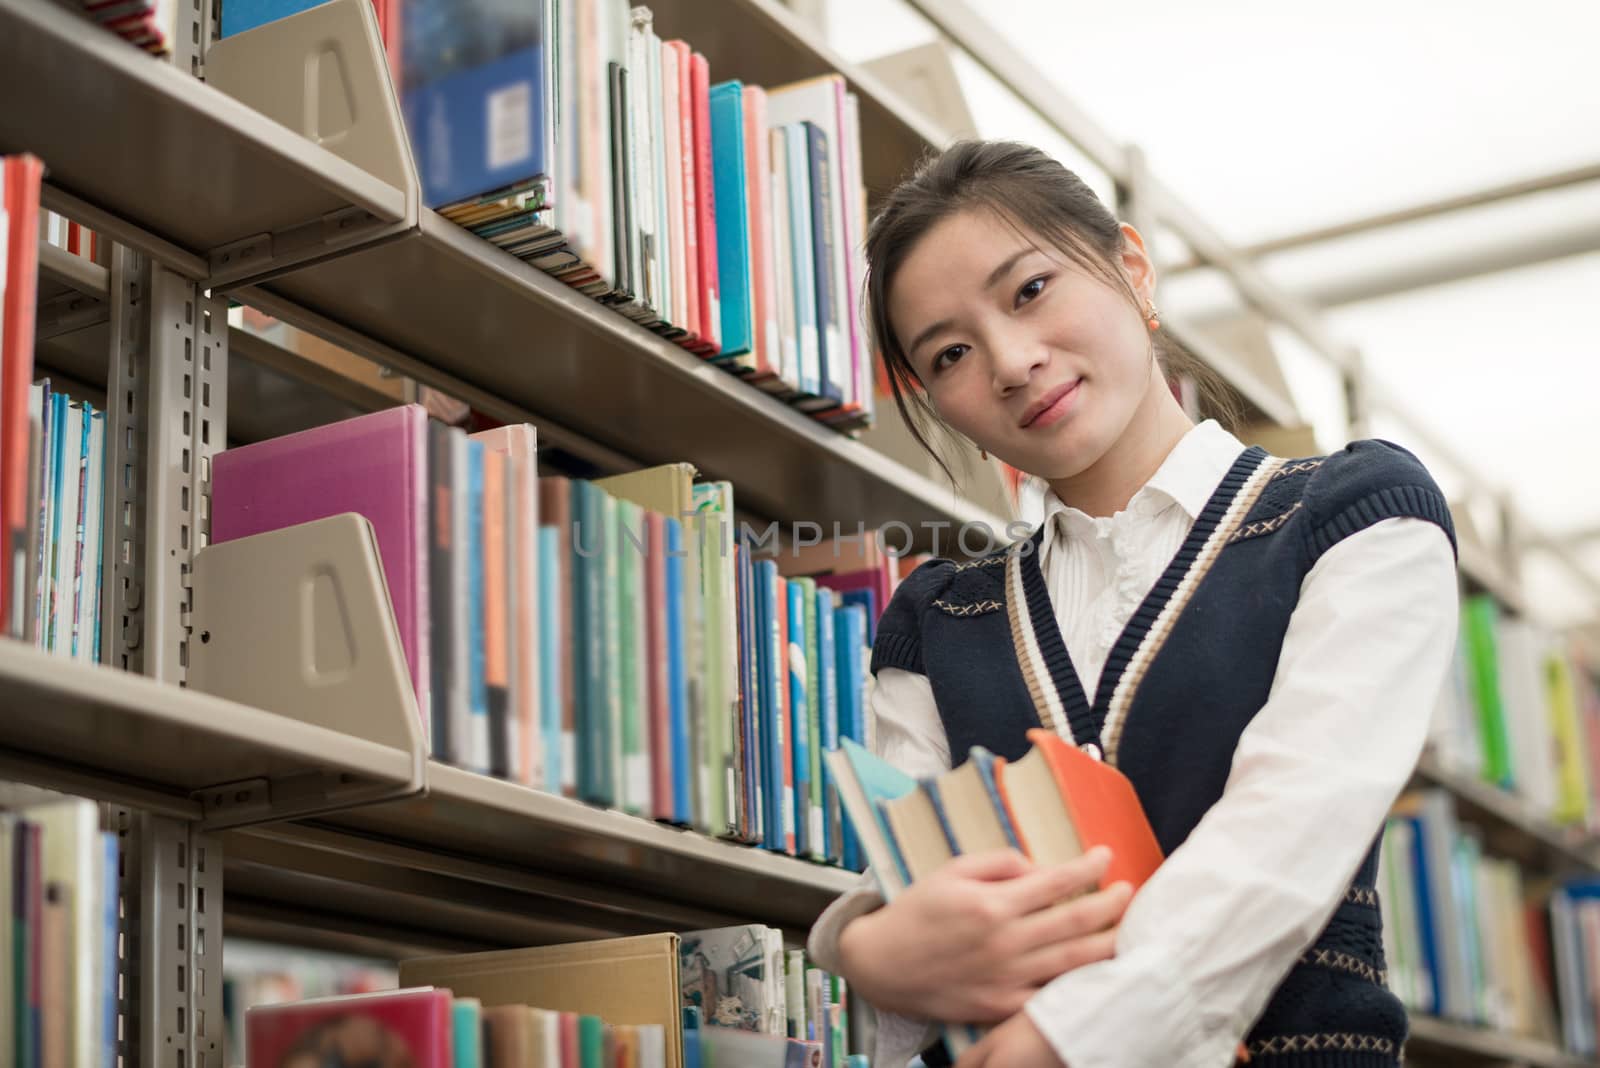 Portrait of cute young female student holding a stack of books next to a bookshelf in library